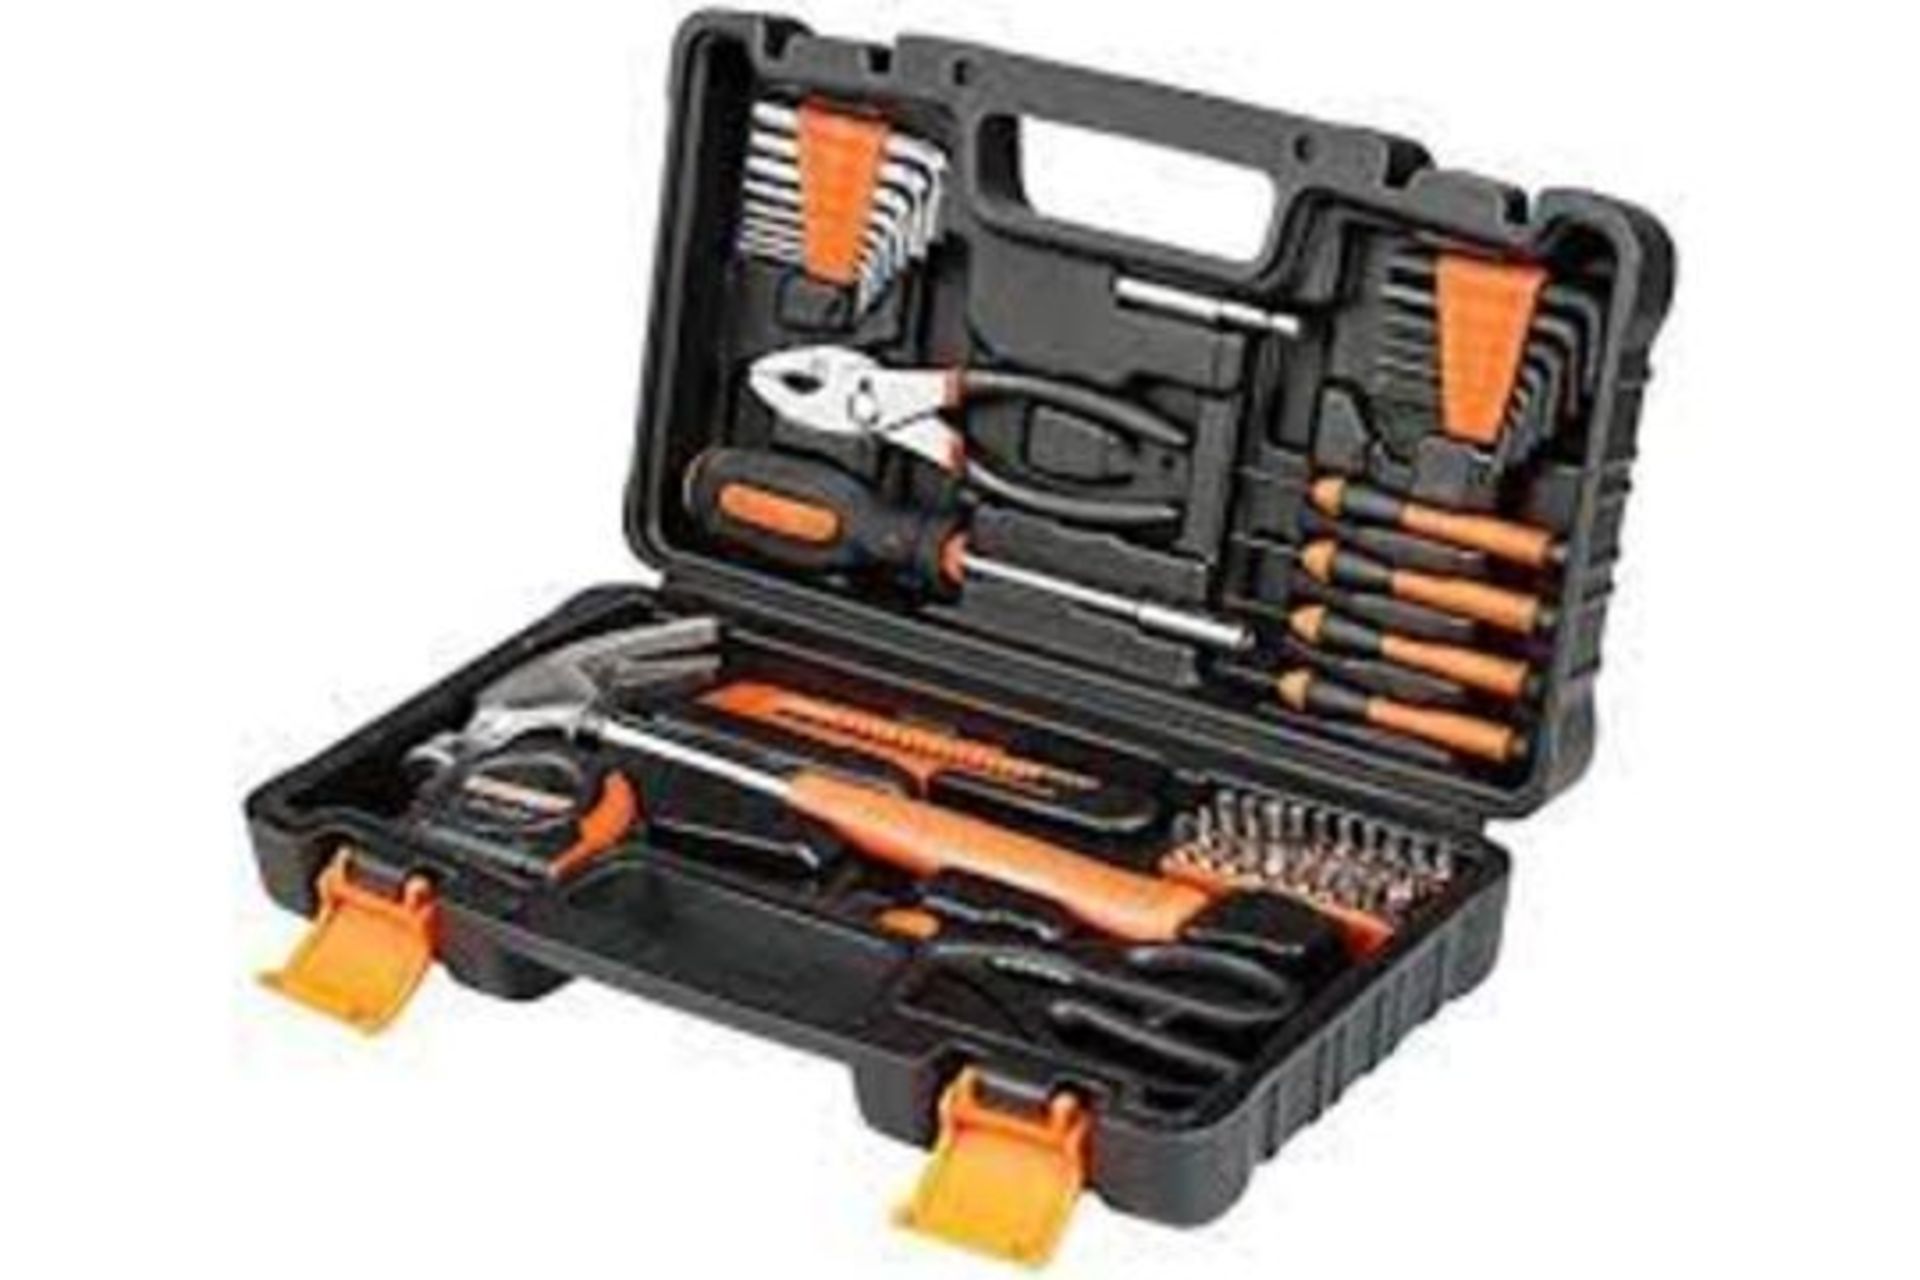 20 X NEW BOXED ENGiNDOT Home Tool Kit, 57-Piece Basic Tool kit with Storage Case. (ROW 10) HANDY FOR